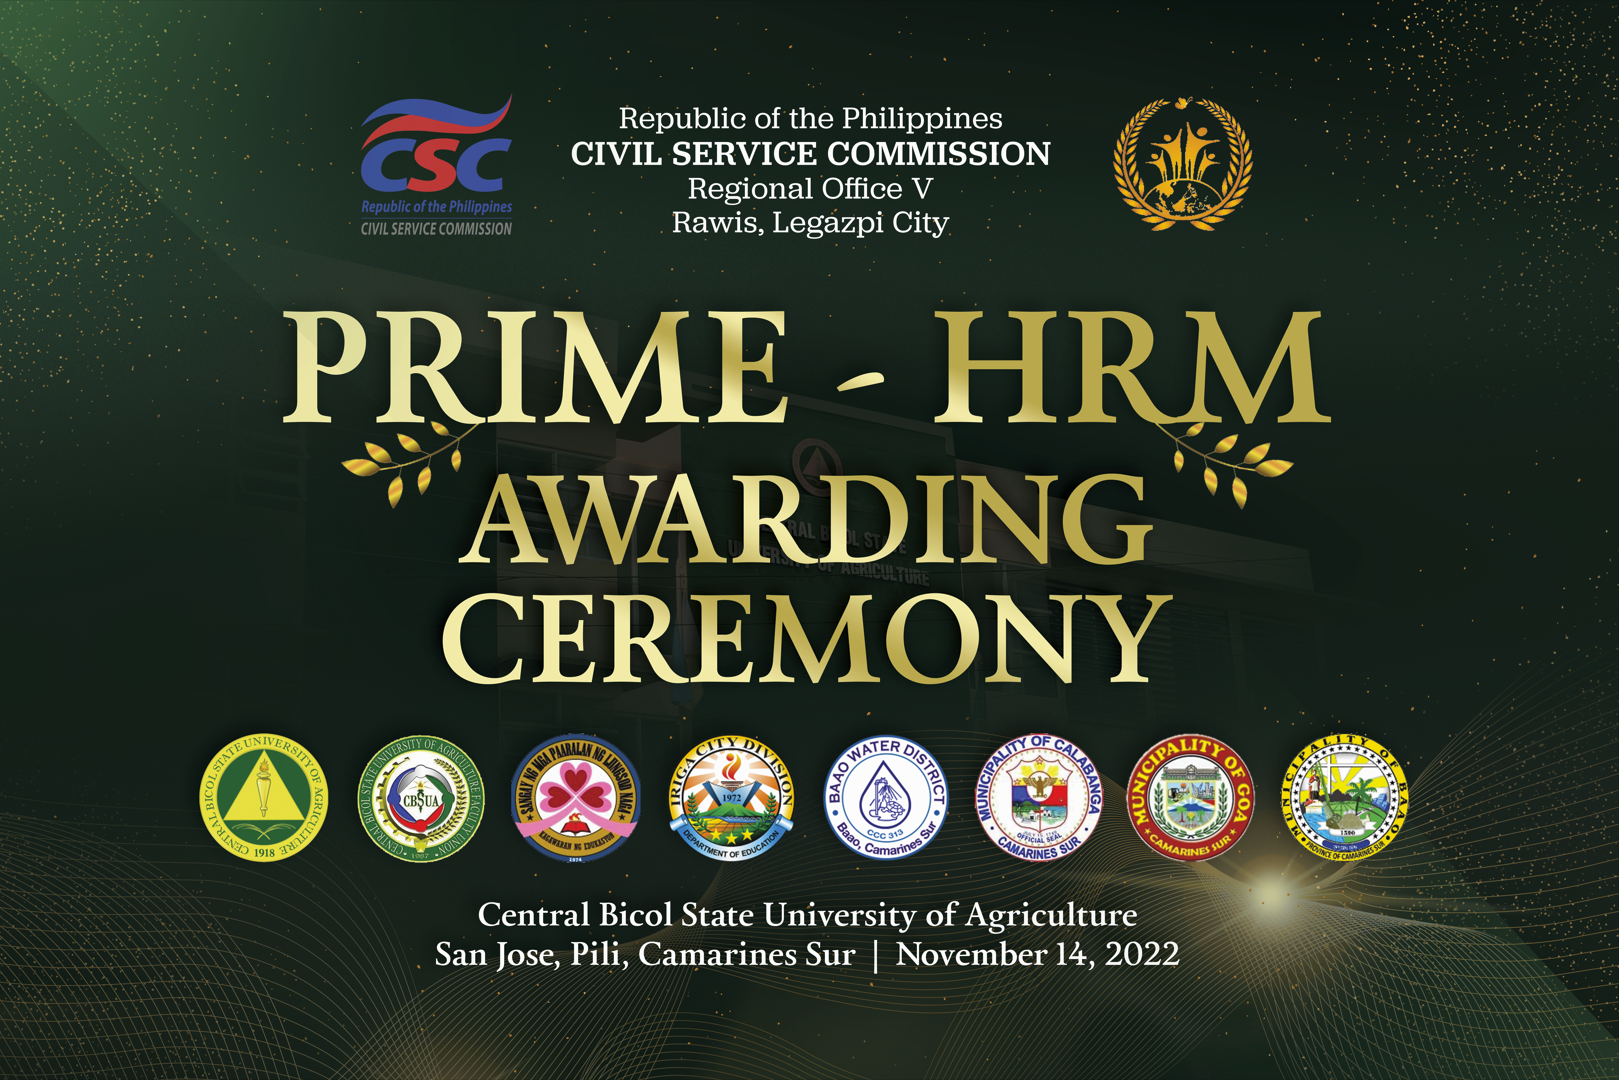 CBSUA RECEIVES PRIME-HRM CERTIFICATES FROM CSC